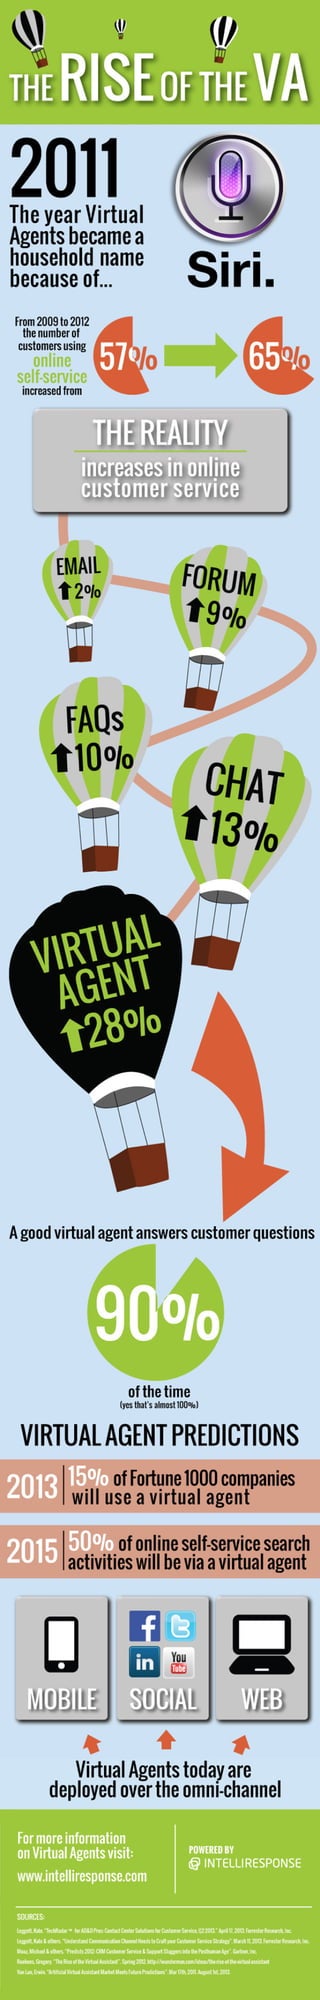 The Rise of the Virtual Agent